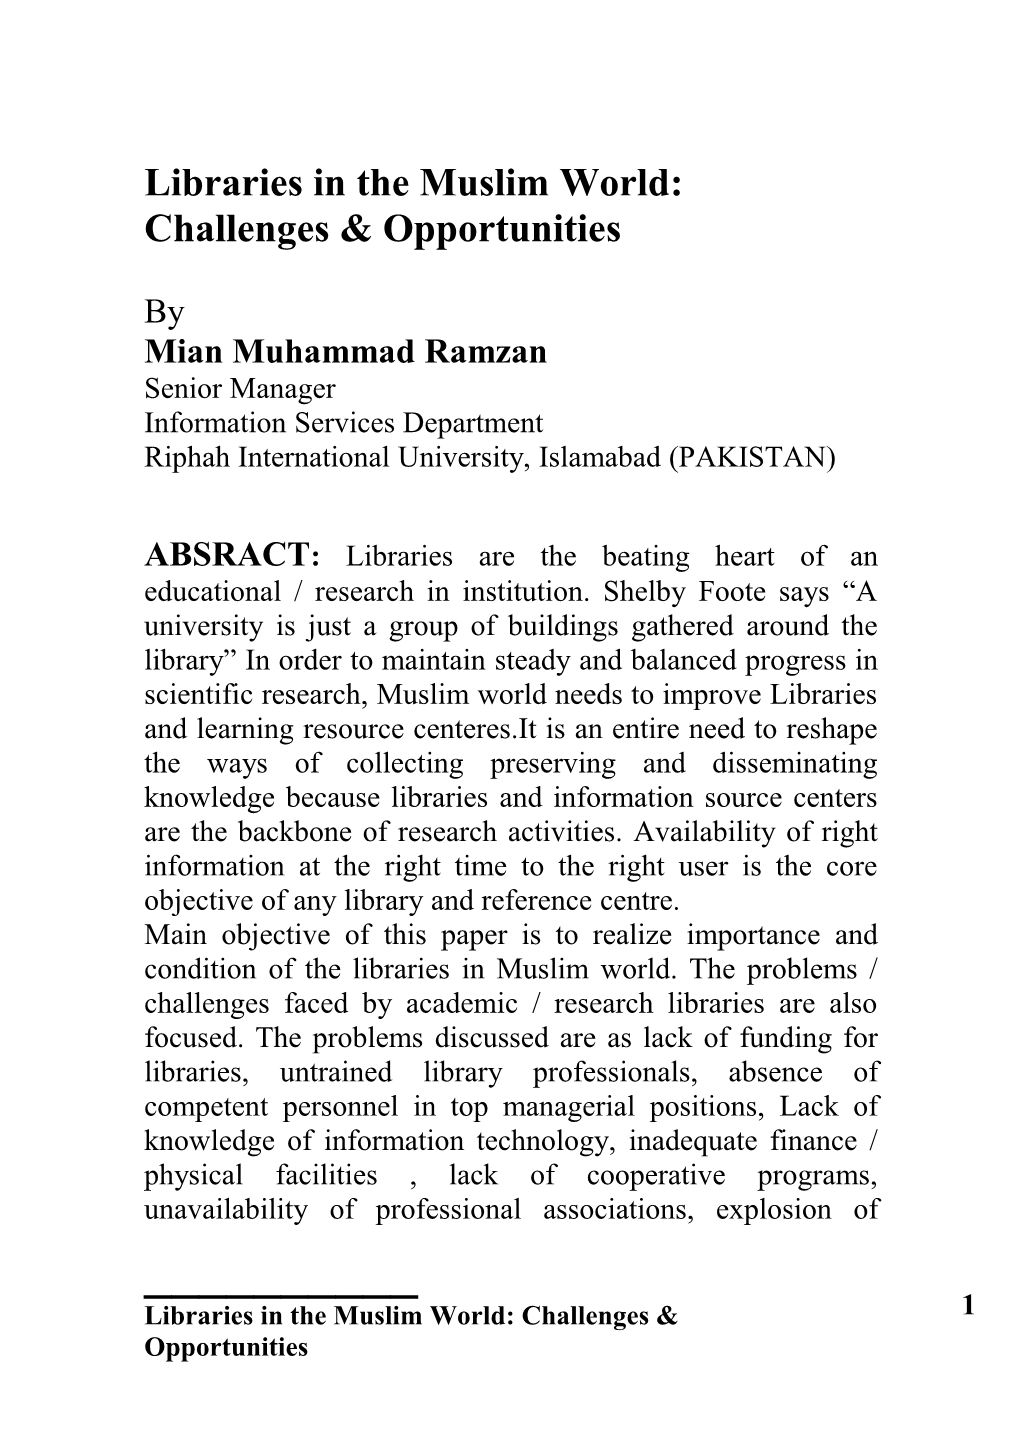 Libraries in the Muslim World: Challenges & Opportunities